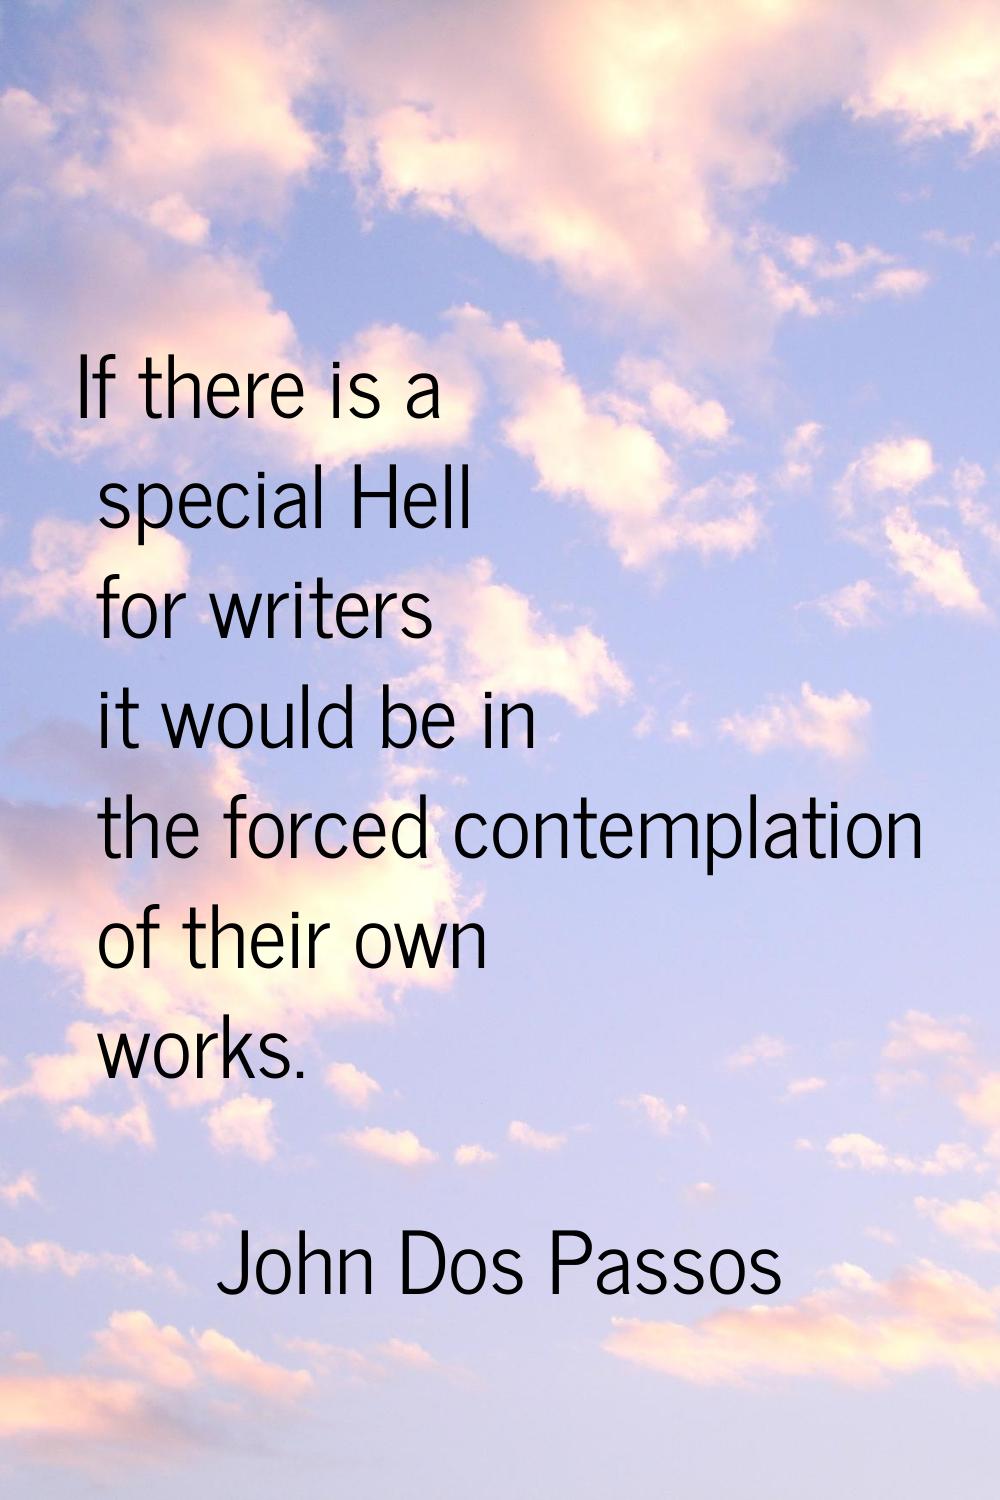 If there is a special Hell for writers it would be in the forced contemplation of their own works.